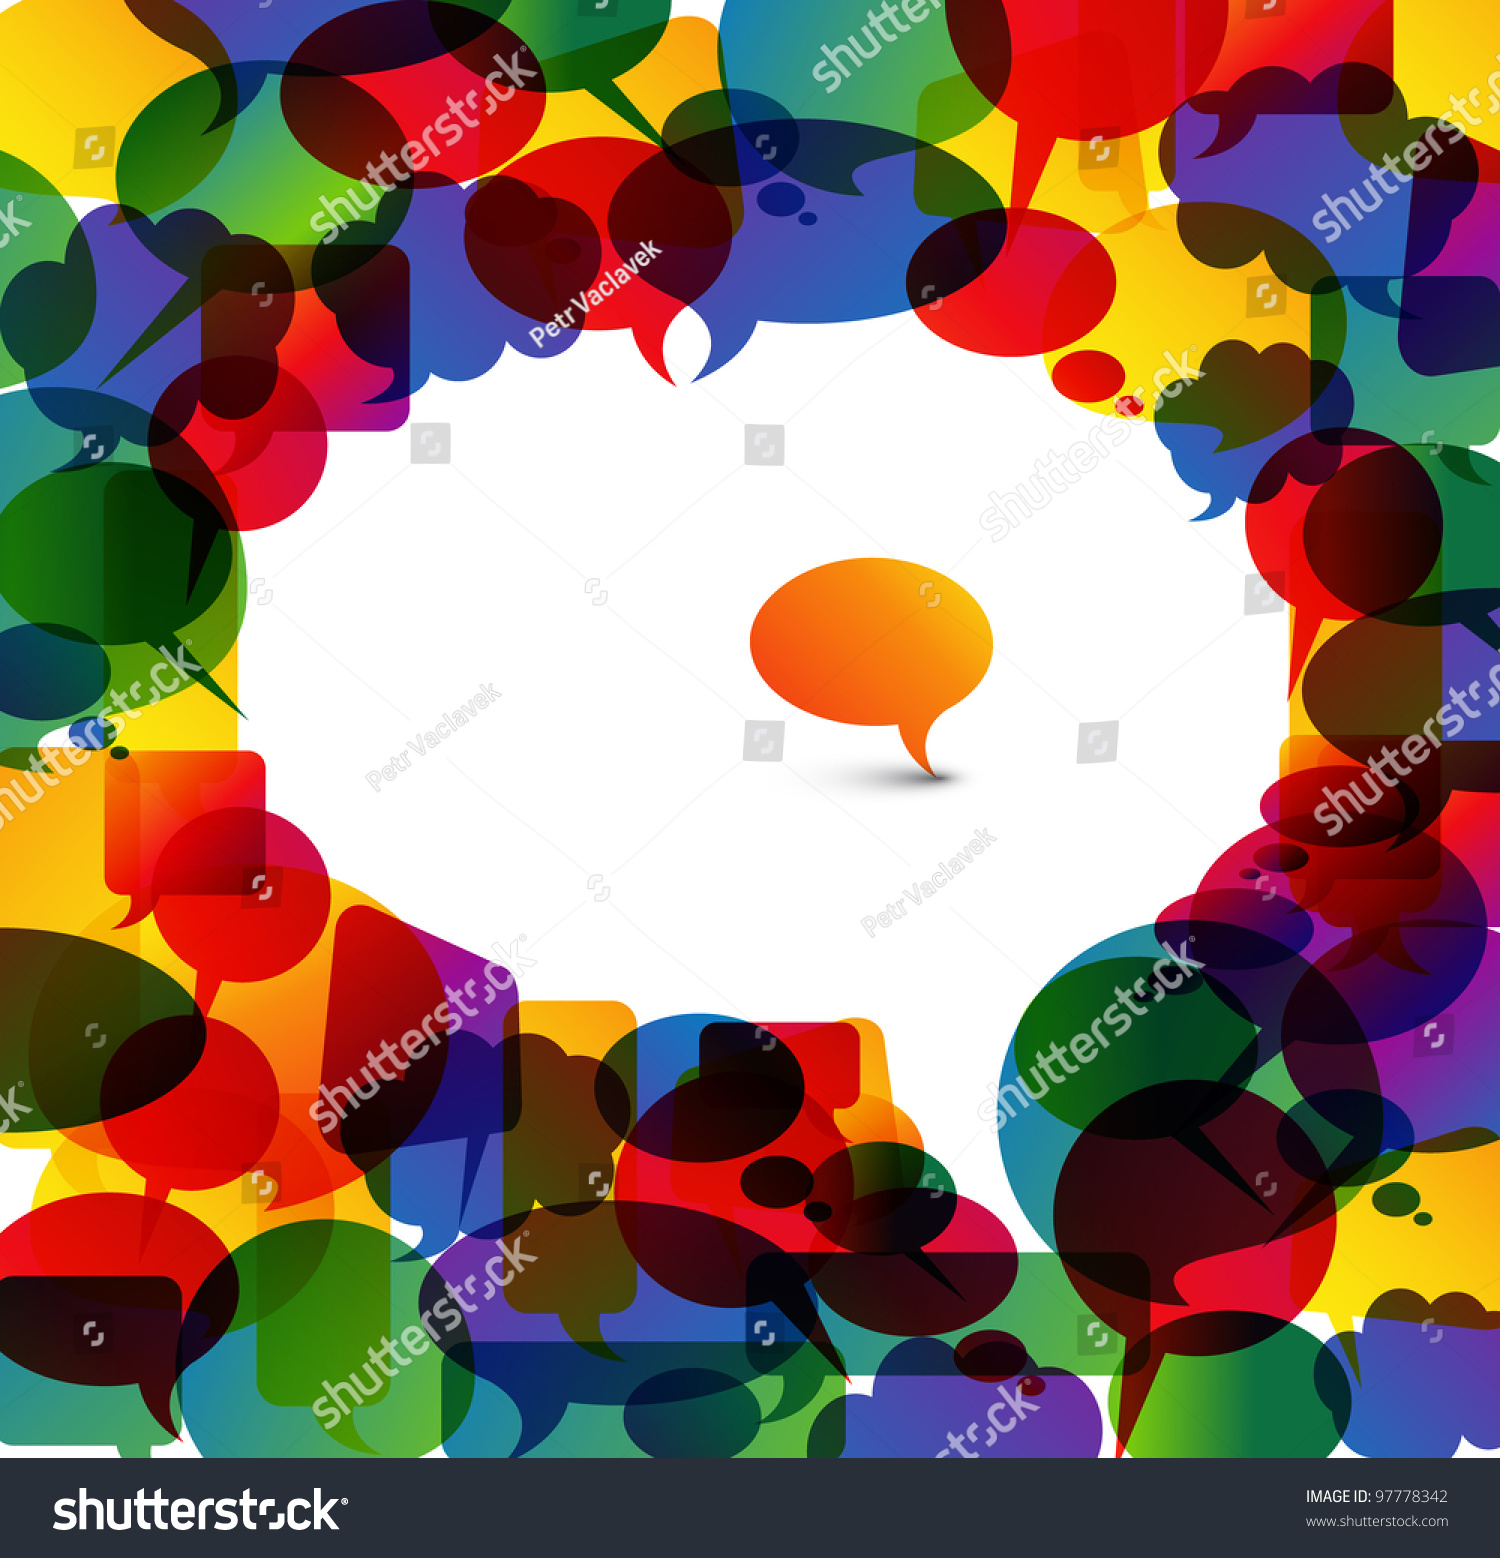 stock-vector-big-white-speech-bubble-made-from-colorful-small-bubbles-97778342.jpg